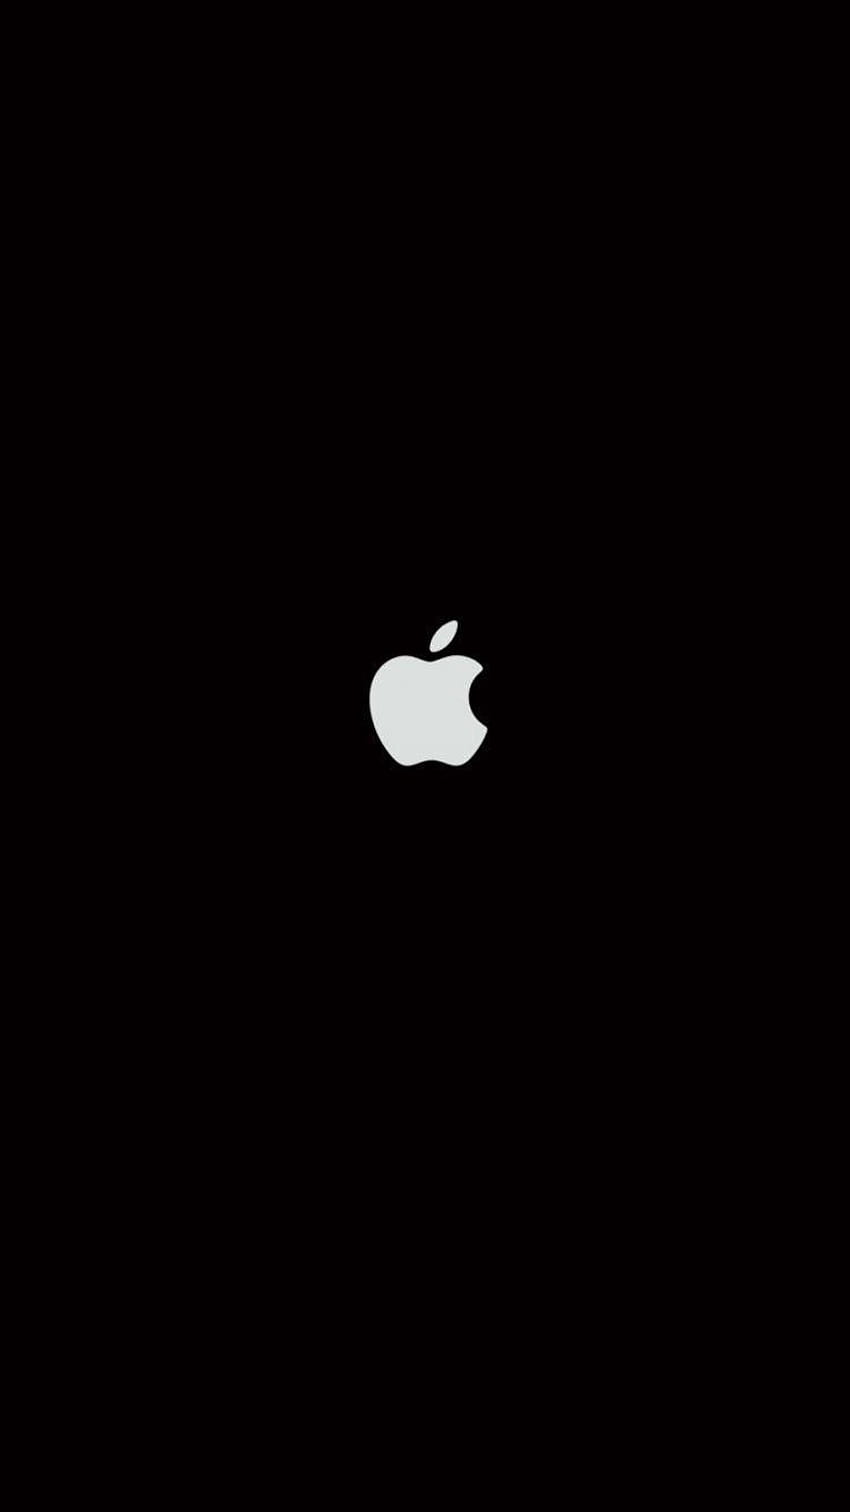 10 Top Black Apple Logo FULL 1920×1080 For PC, adidas and nike HD phone wallpaper